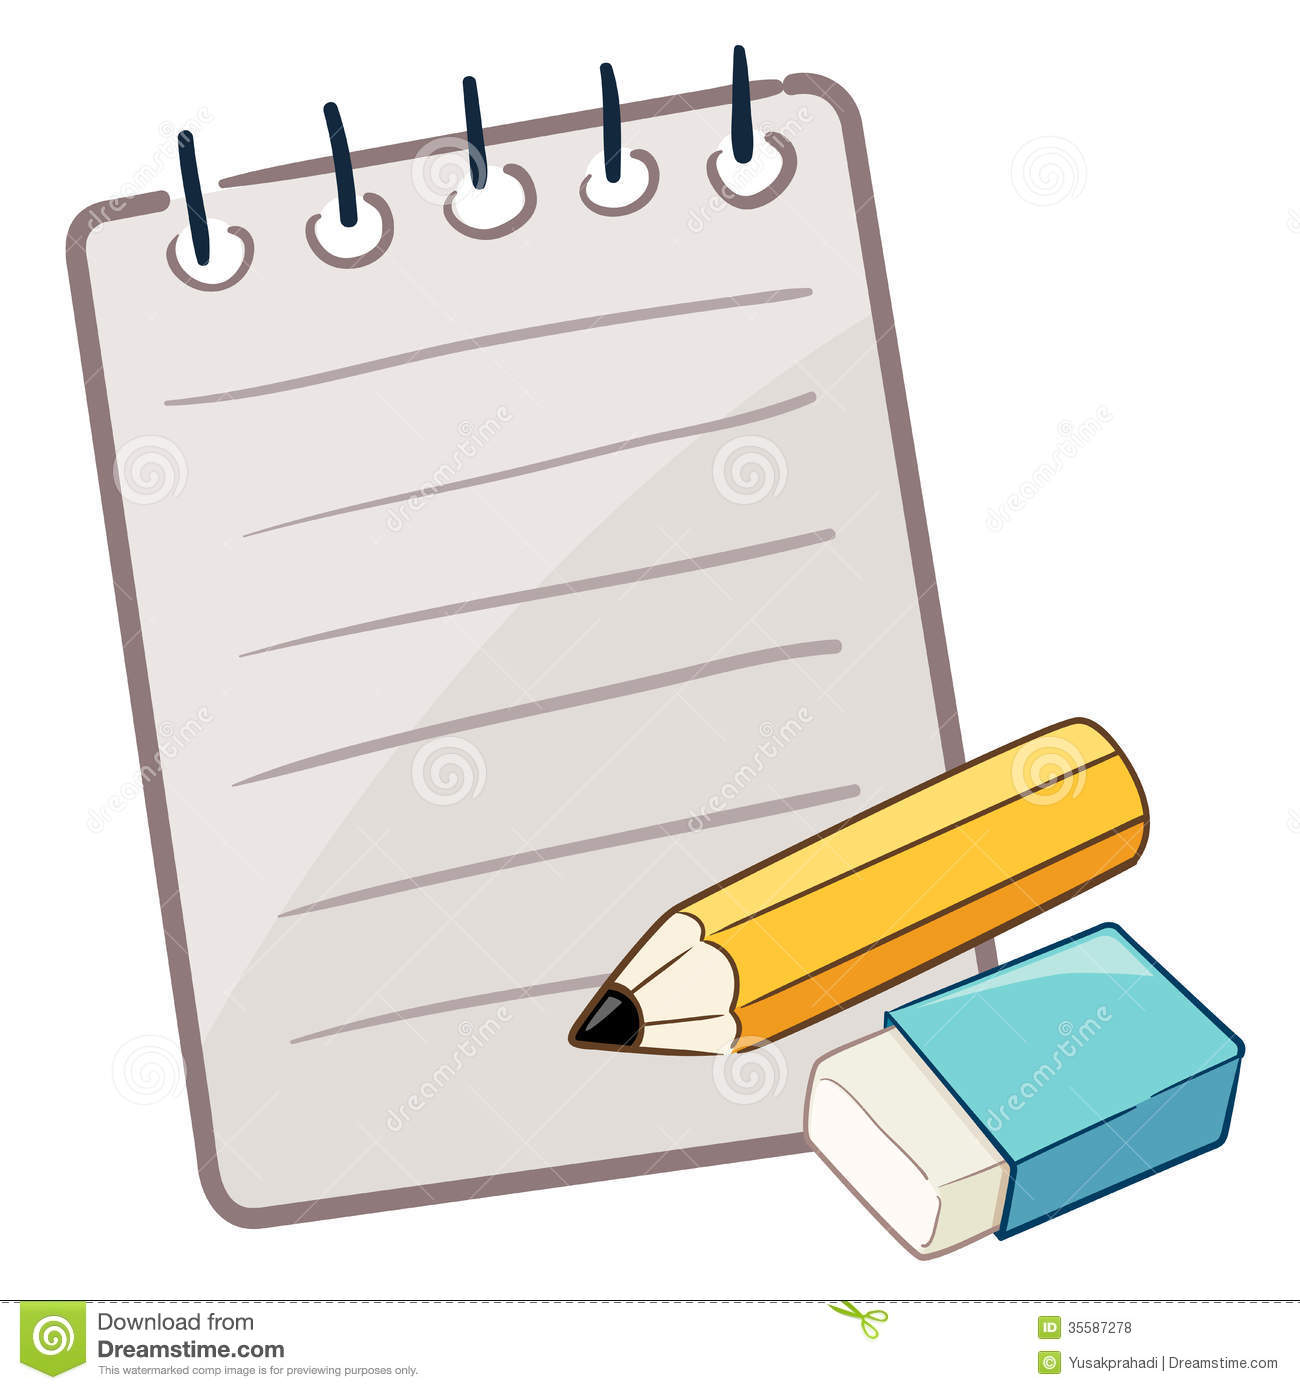 Paper With Pencil And Eraser Royalty Free Stock Photos   Image